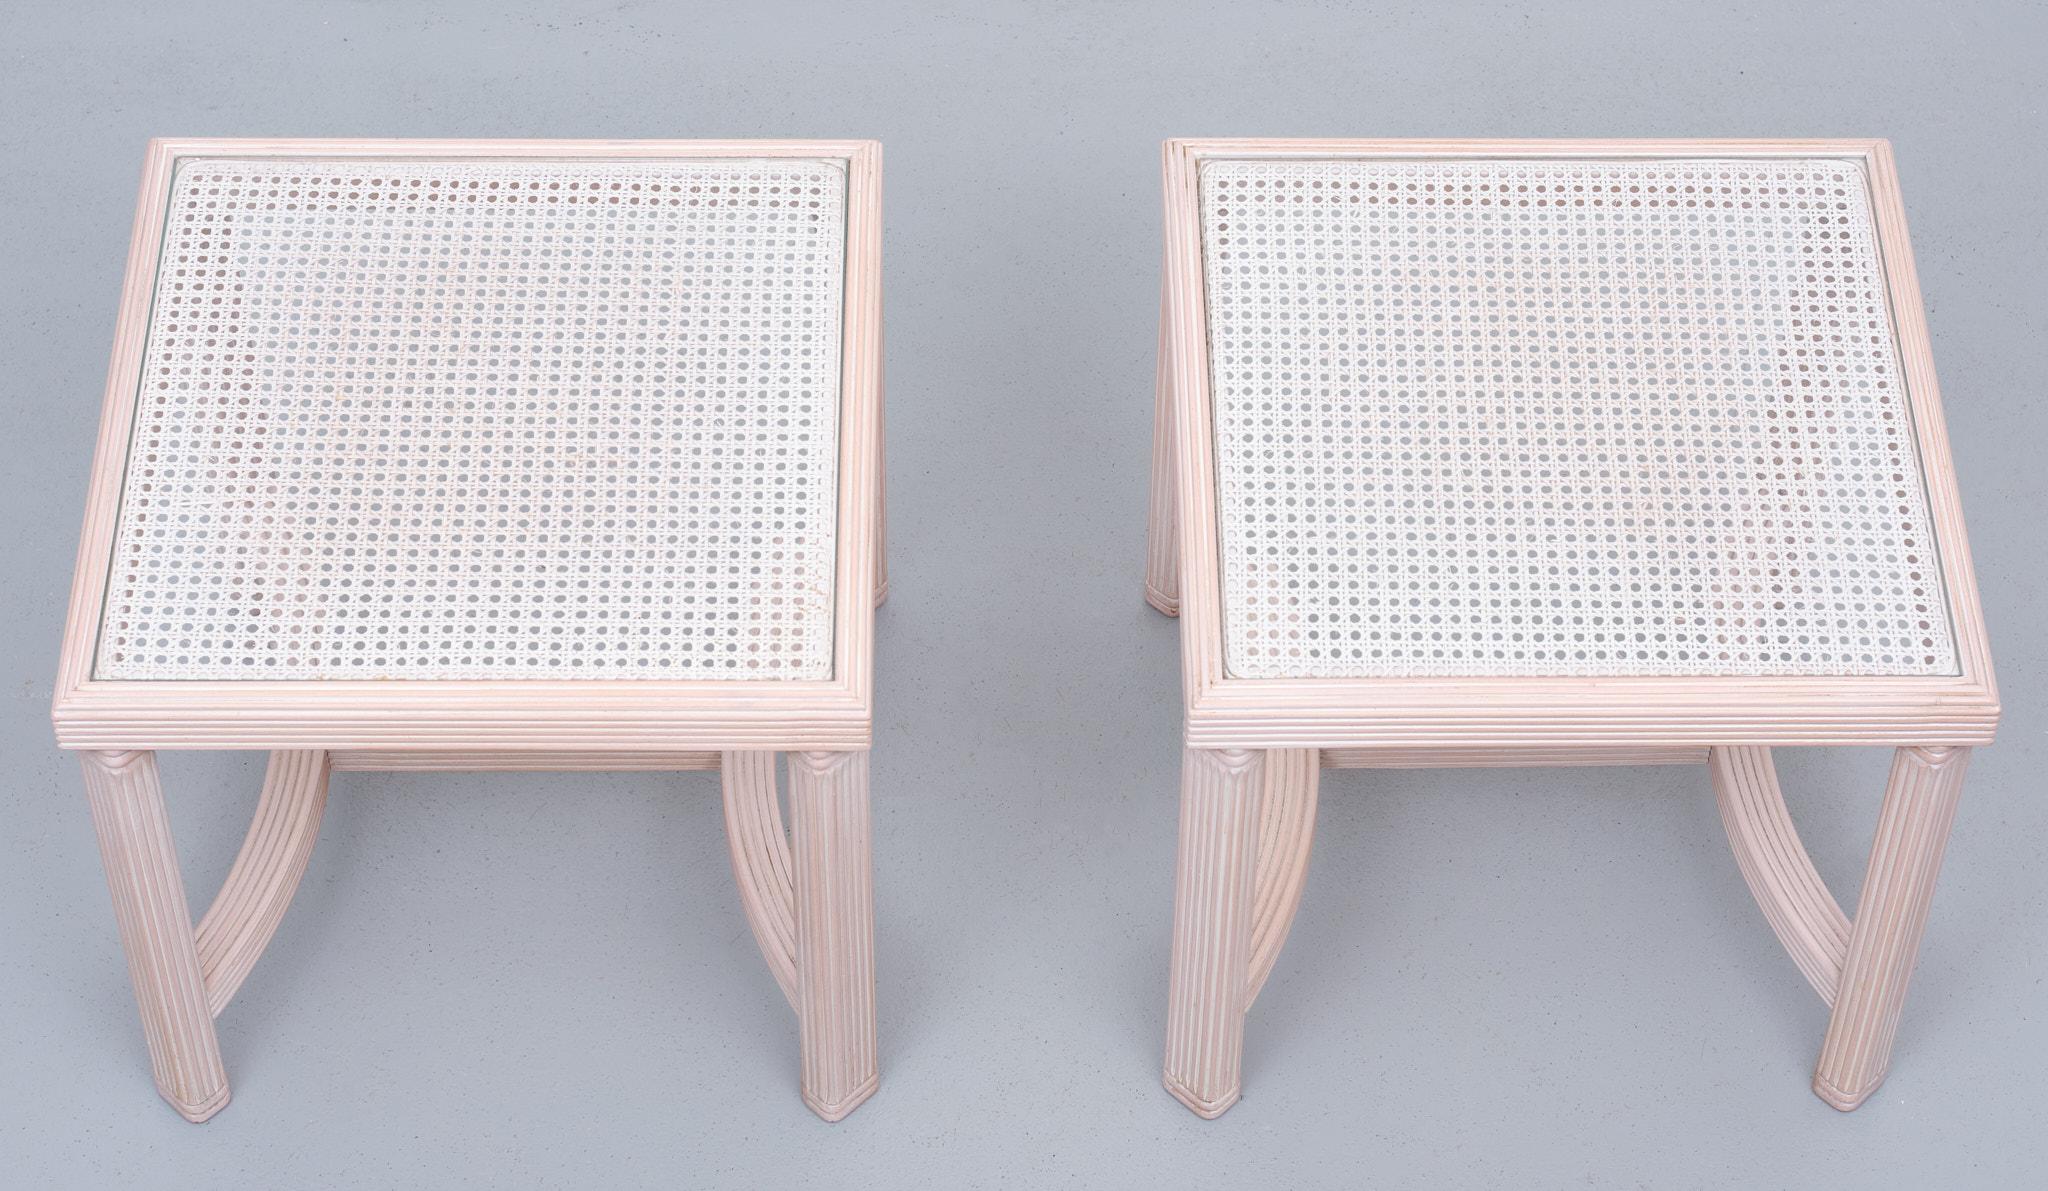 Two very nice attractive Wicker side tables. Beveled glass top. In a light 
Pink color. Sofa tables, Nightstands, End tables can be used in many different
ways. Very good condition.